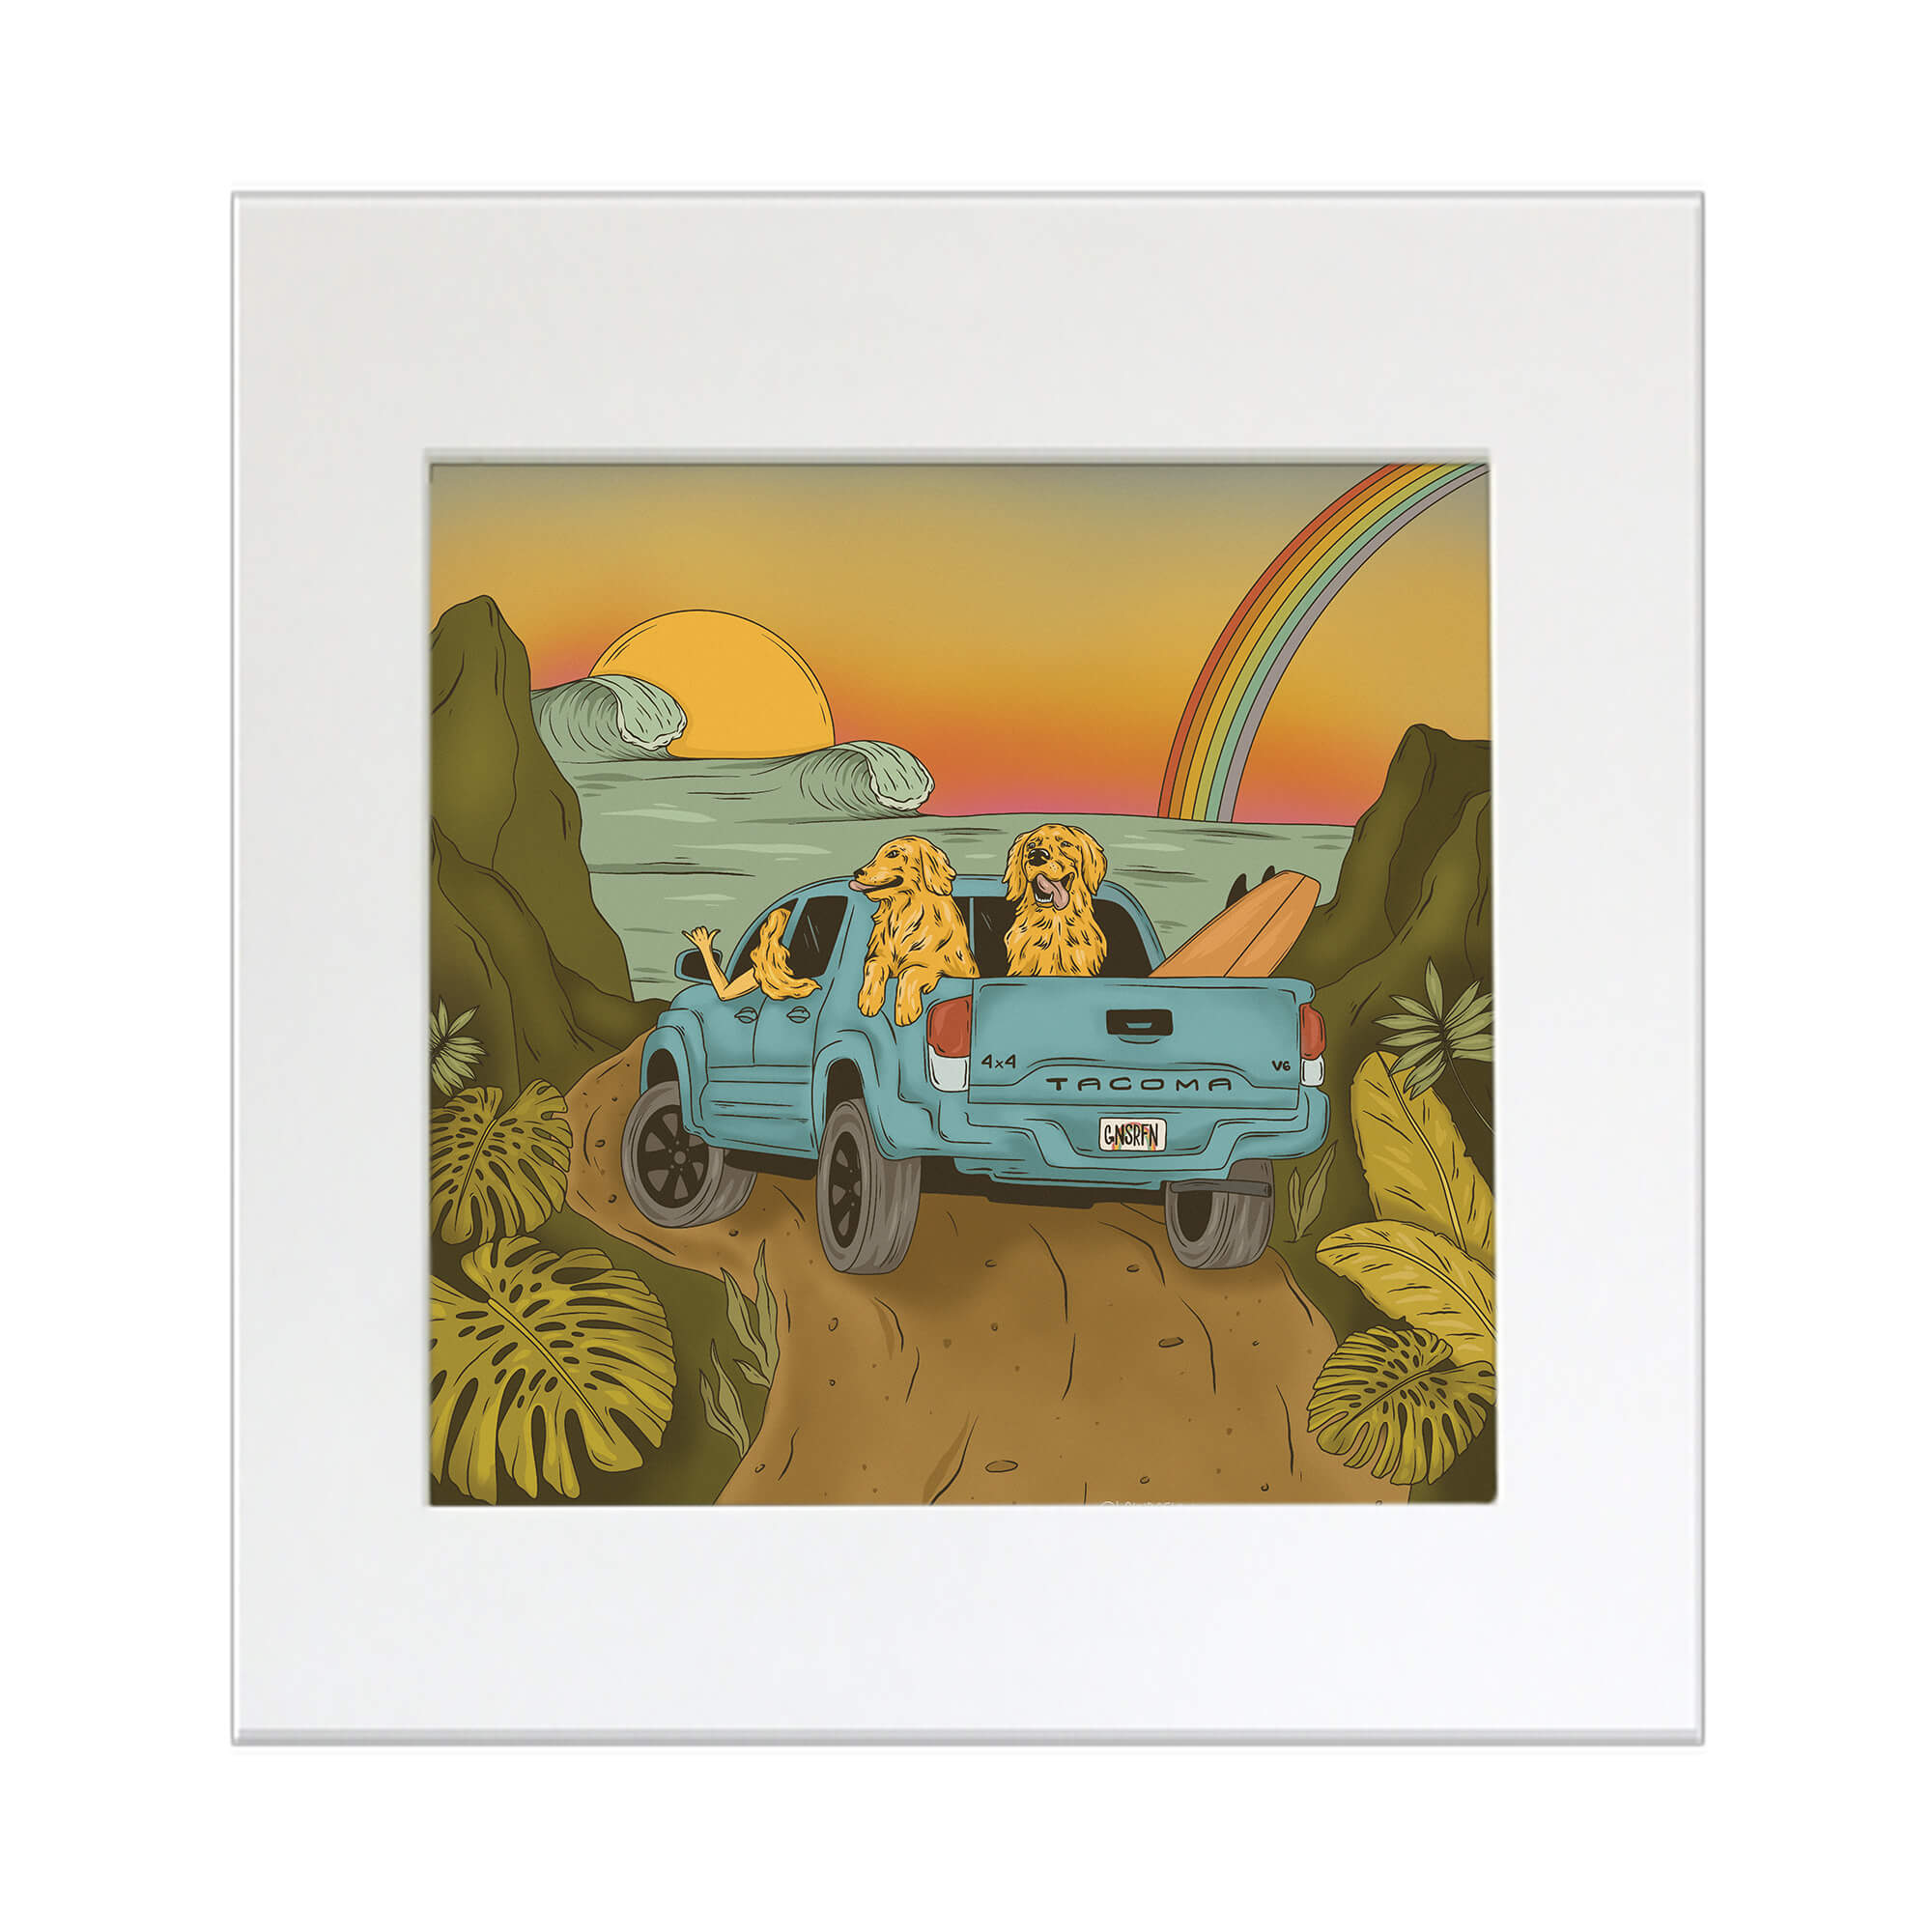 Matted art print of a surf with some dogs, a woman and a surfboard heading to the beach by Hawaii artist Laihha Organna